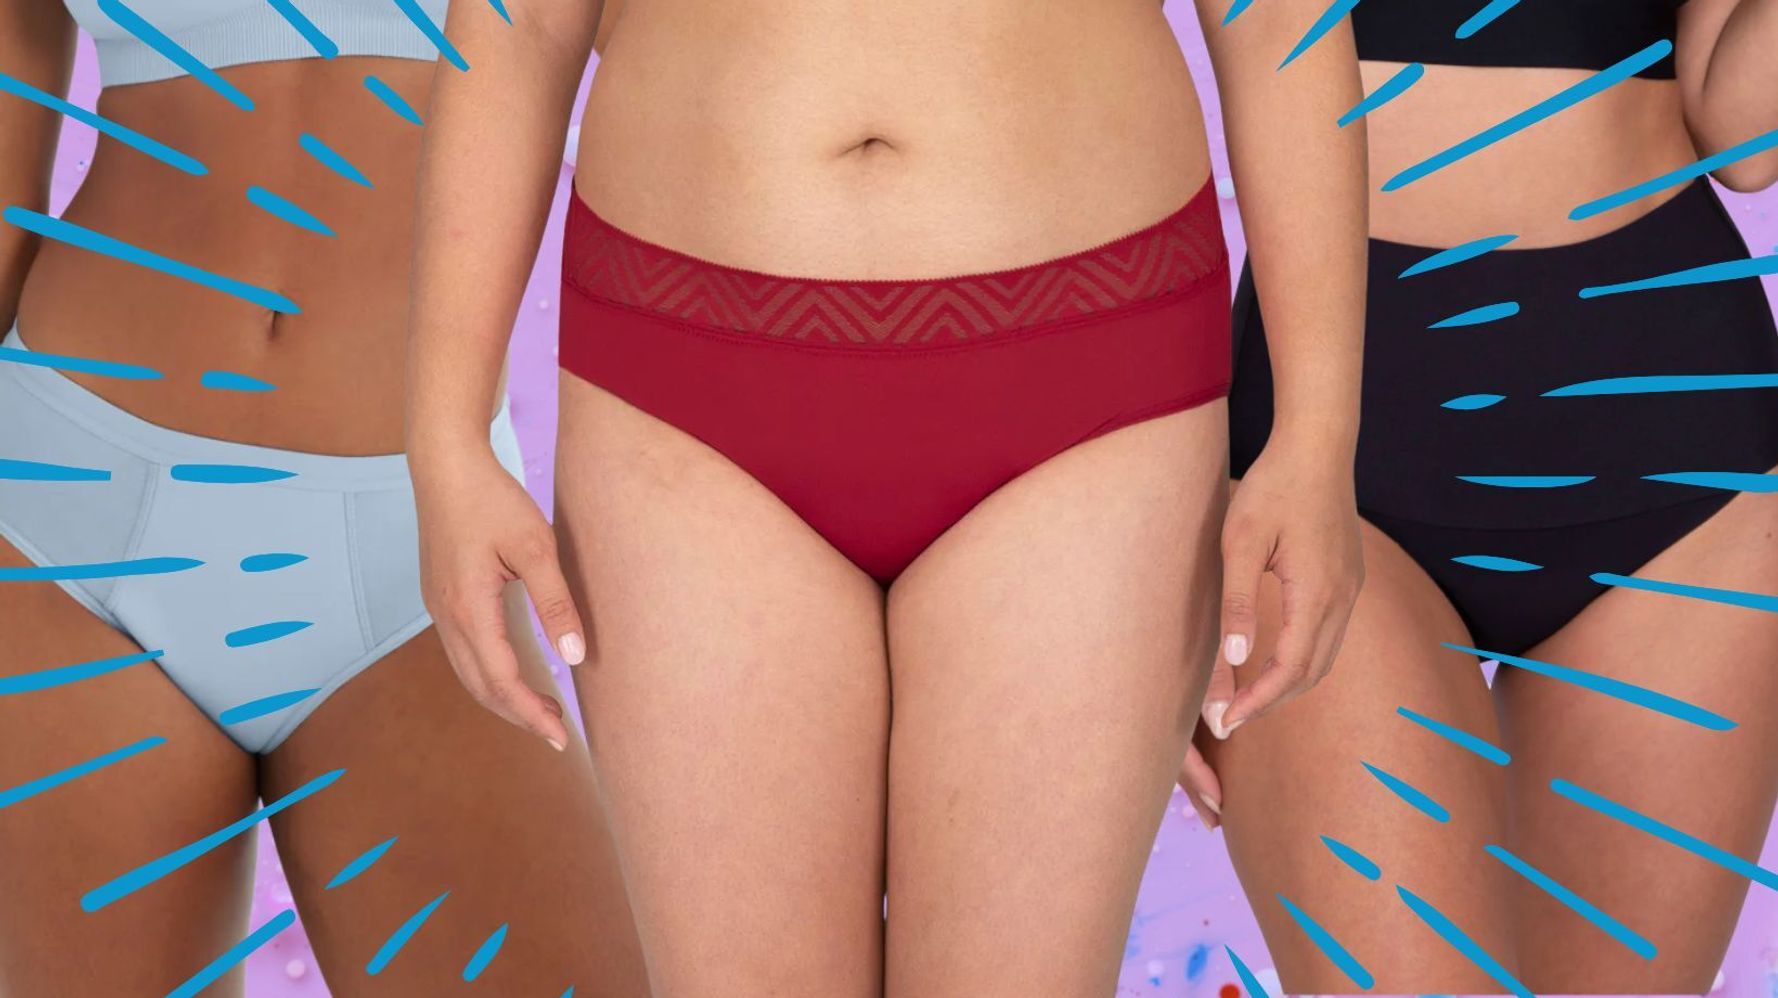 10 Best Period Panties That Are Super Adorable + Very Absorbent